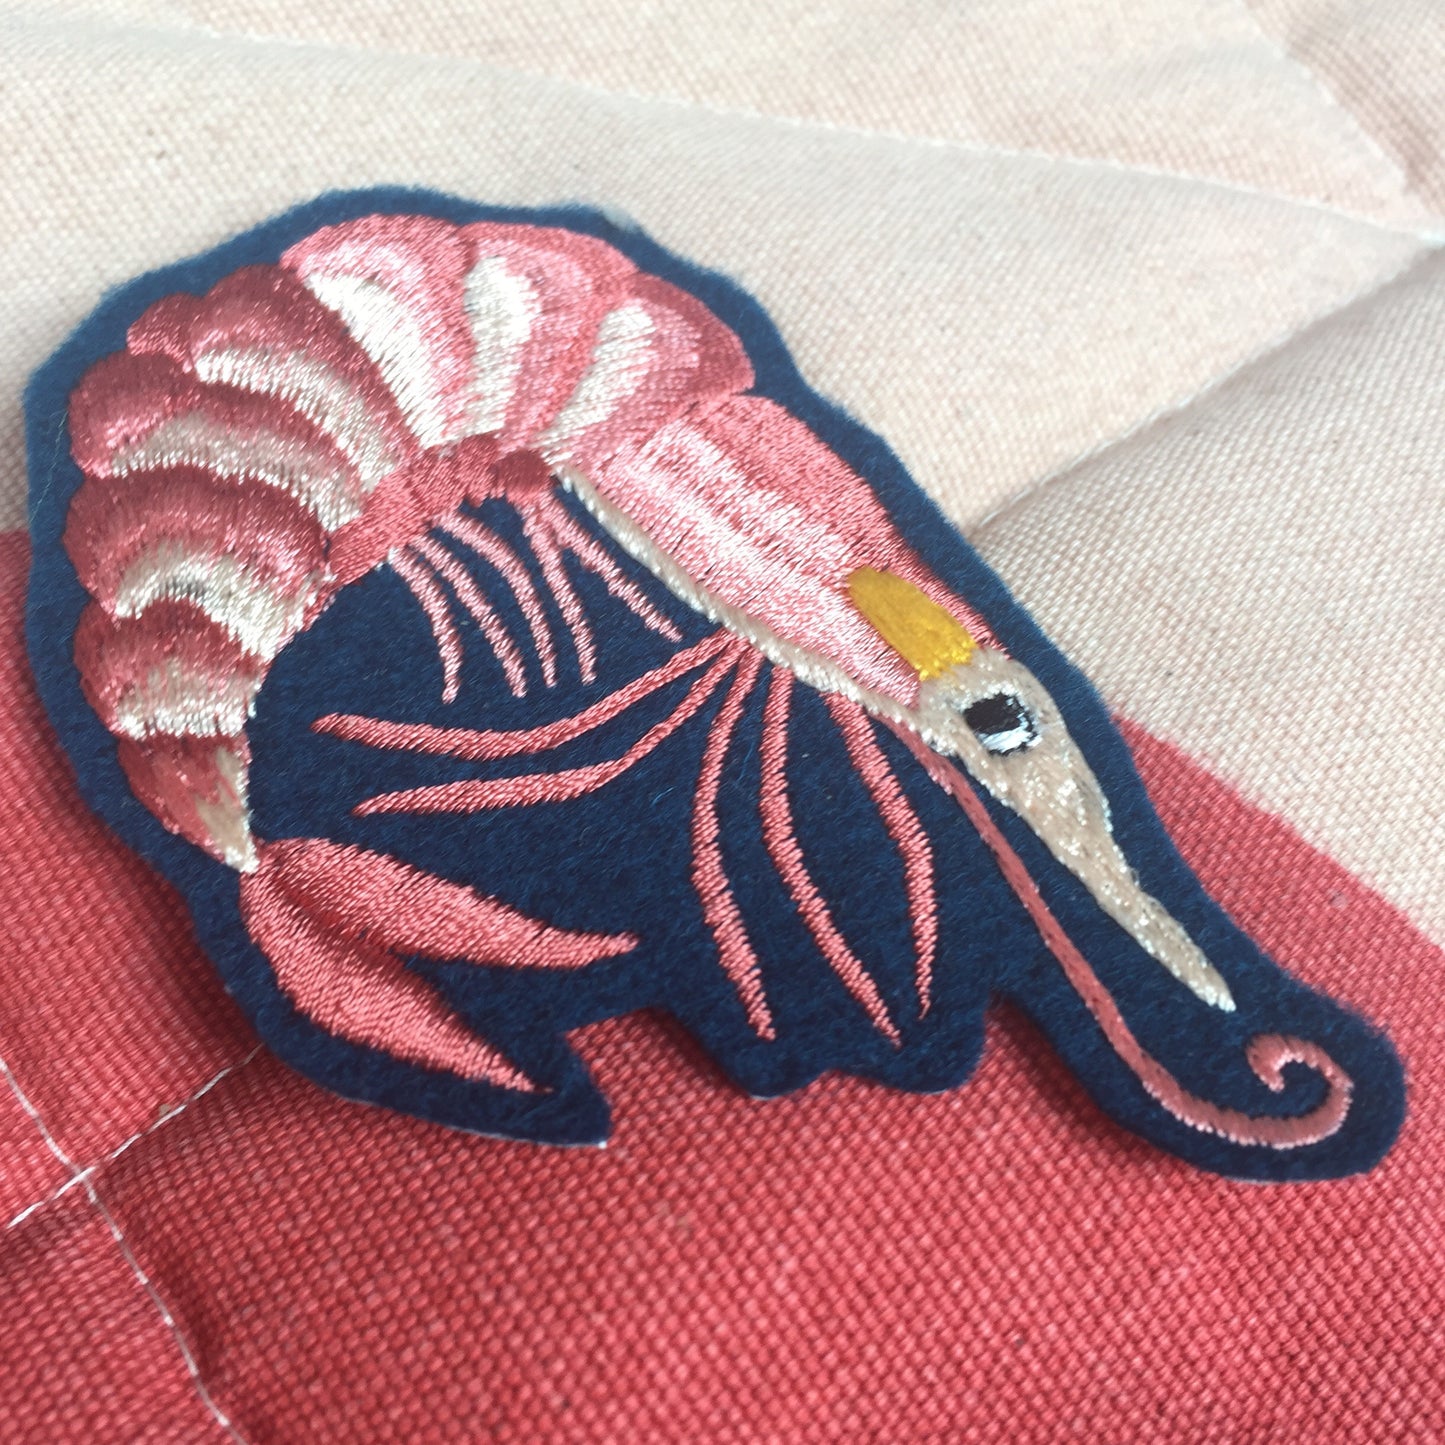 Prawn embroidered patch, close-up